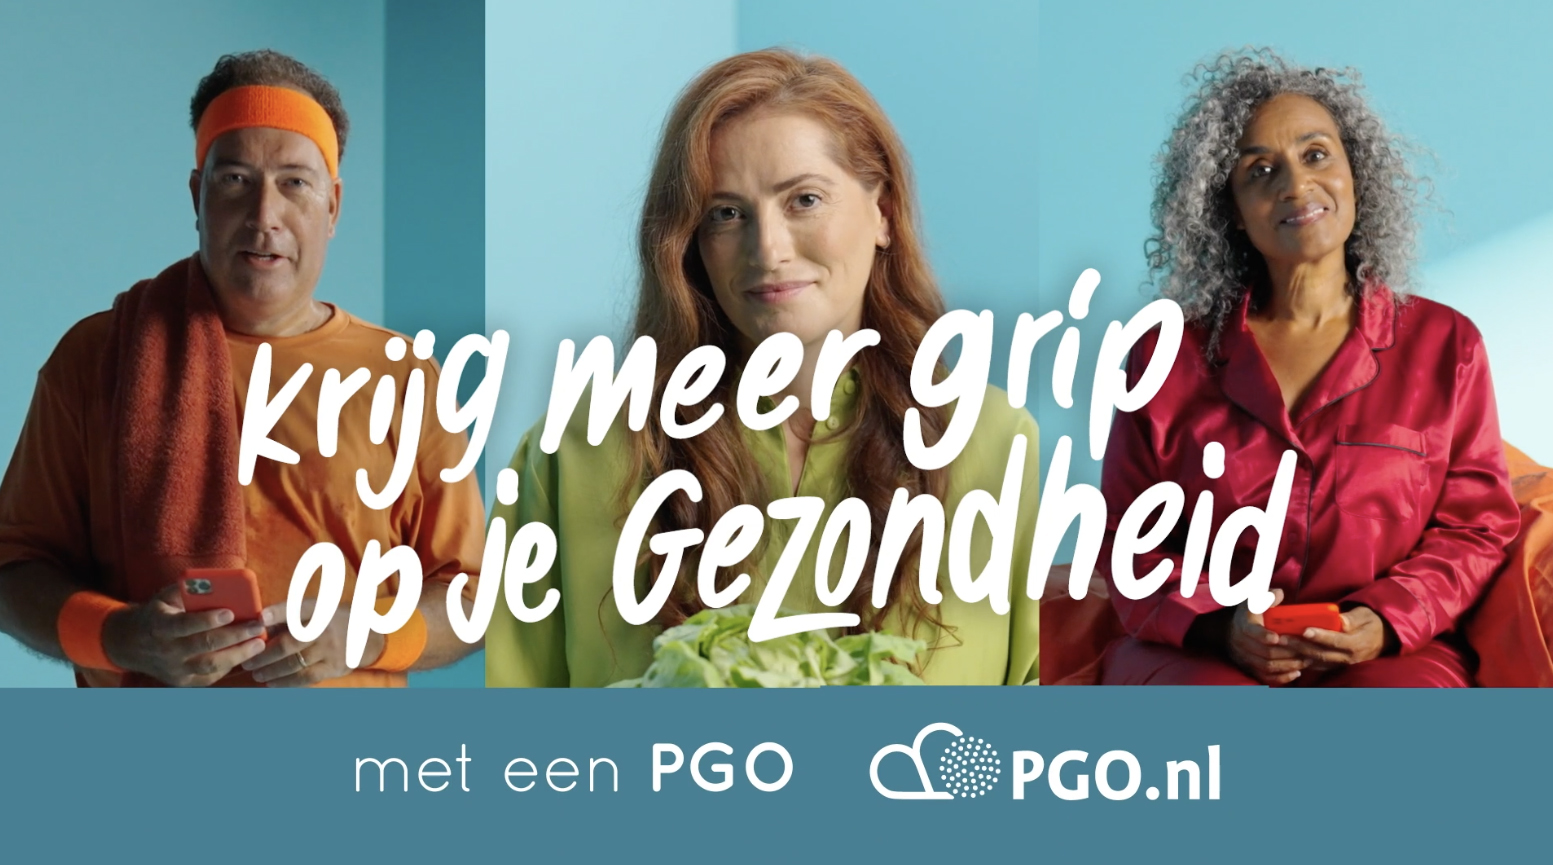 New campaign for PGO made by Matthijs Immink